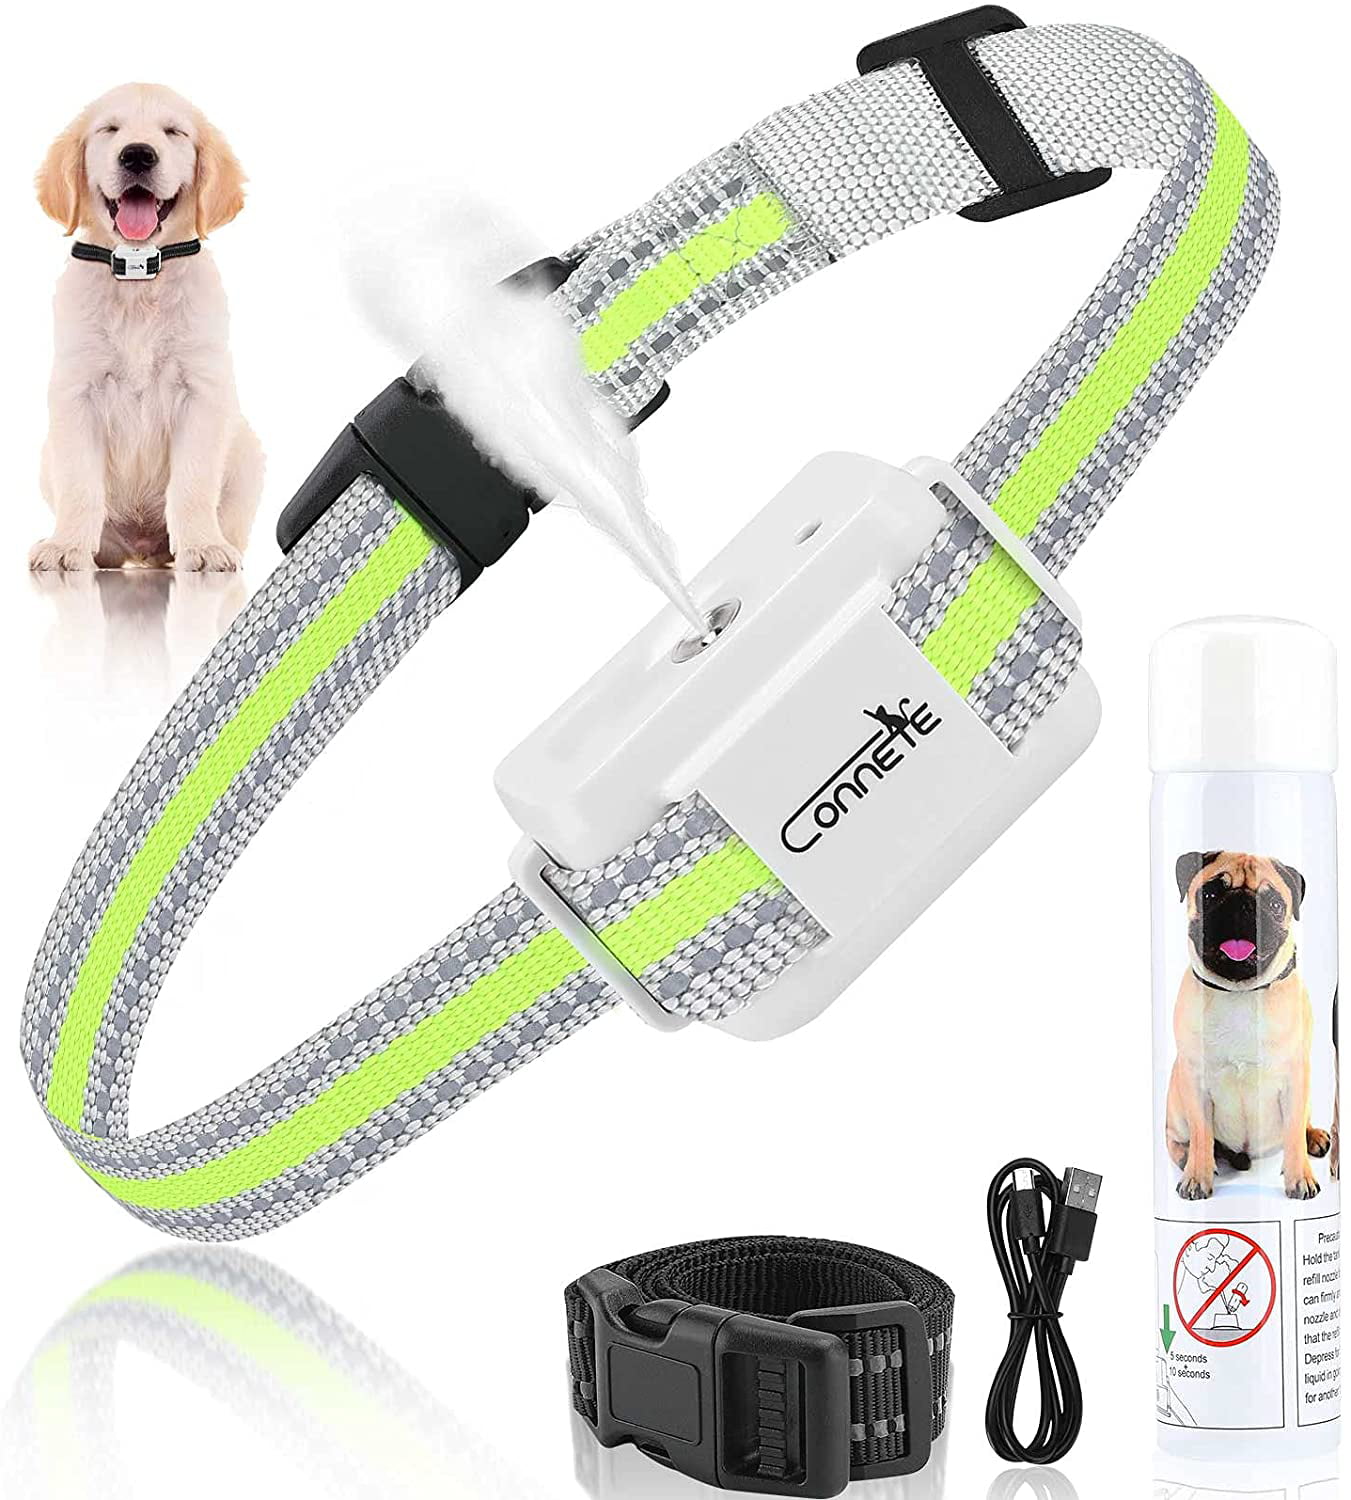 Rechargeable Adjustable Waterproof Anti Barking Control Collar for Dogs Include Citronella Spray No Electric Shock Humane Safe Citronella Spray Dog Bark Collar Dog Citronella Training Collar 